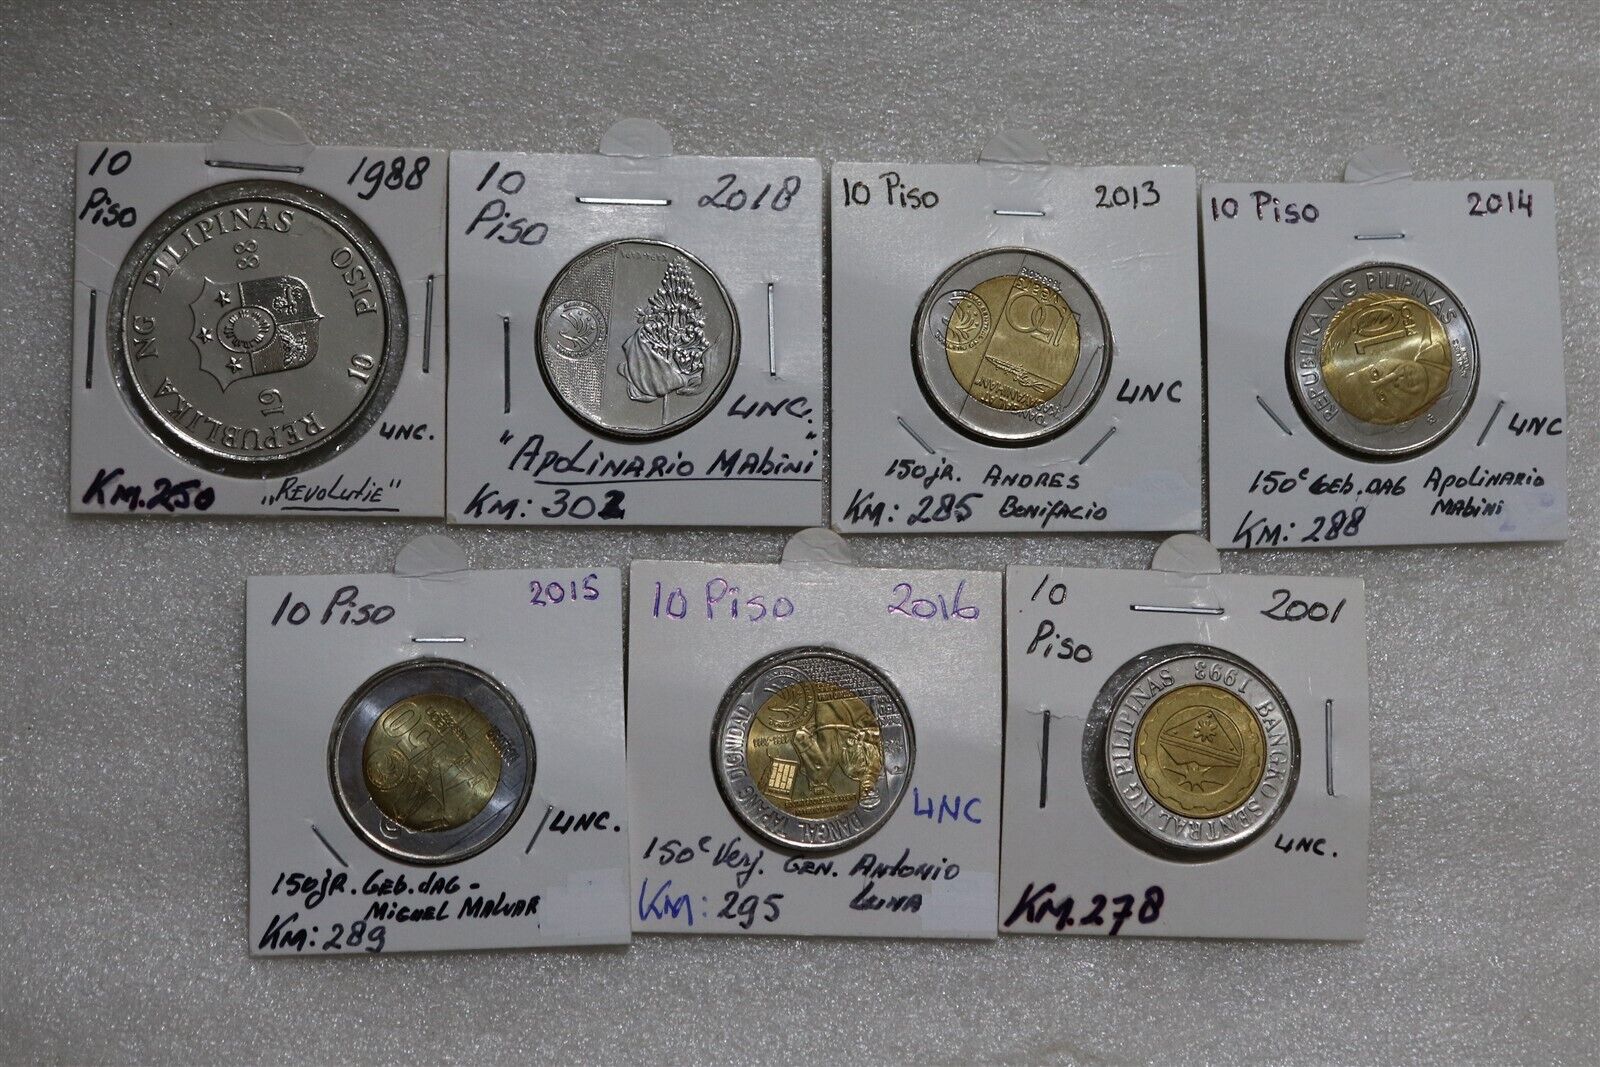 PHILIPPINES - 10 PISO - 7 COINS COLLECTION B49 #1607